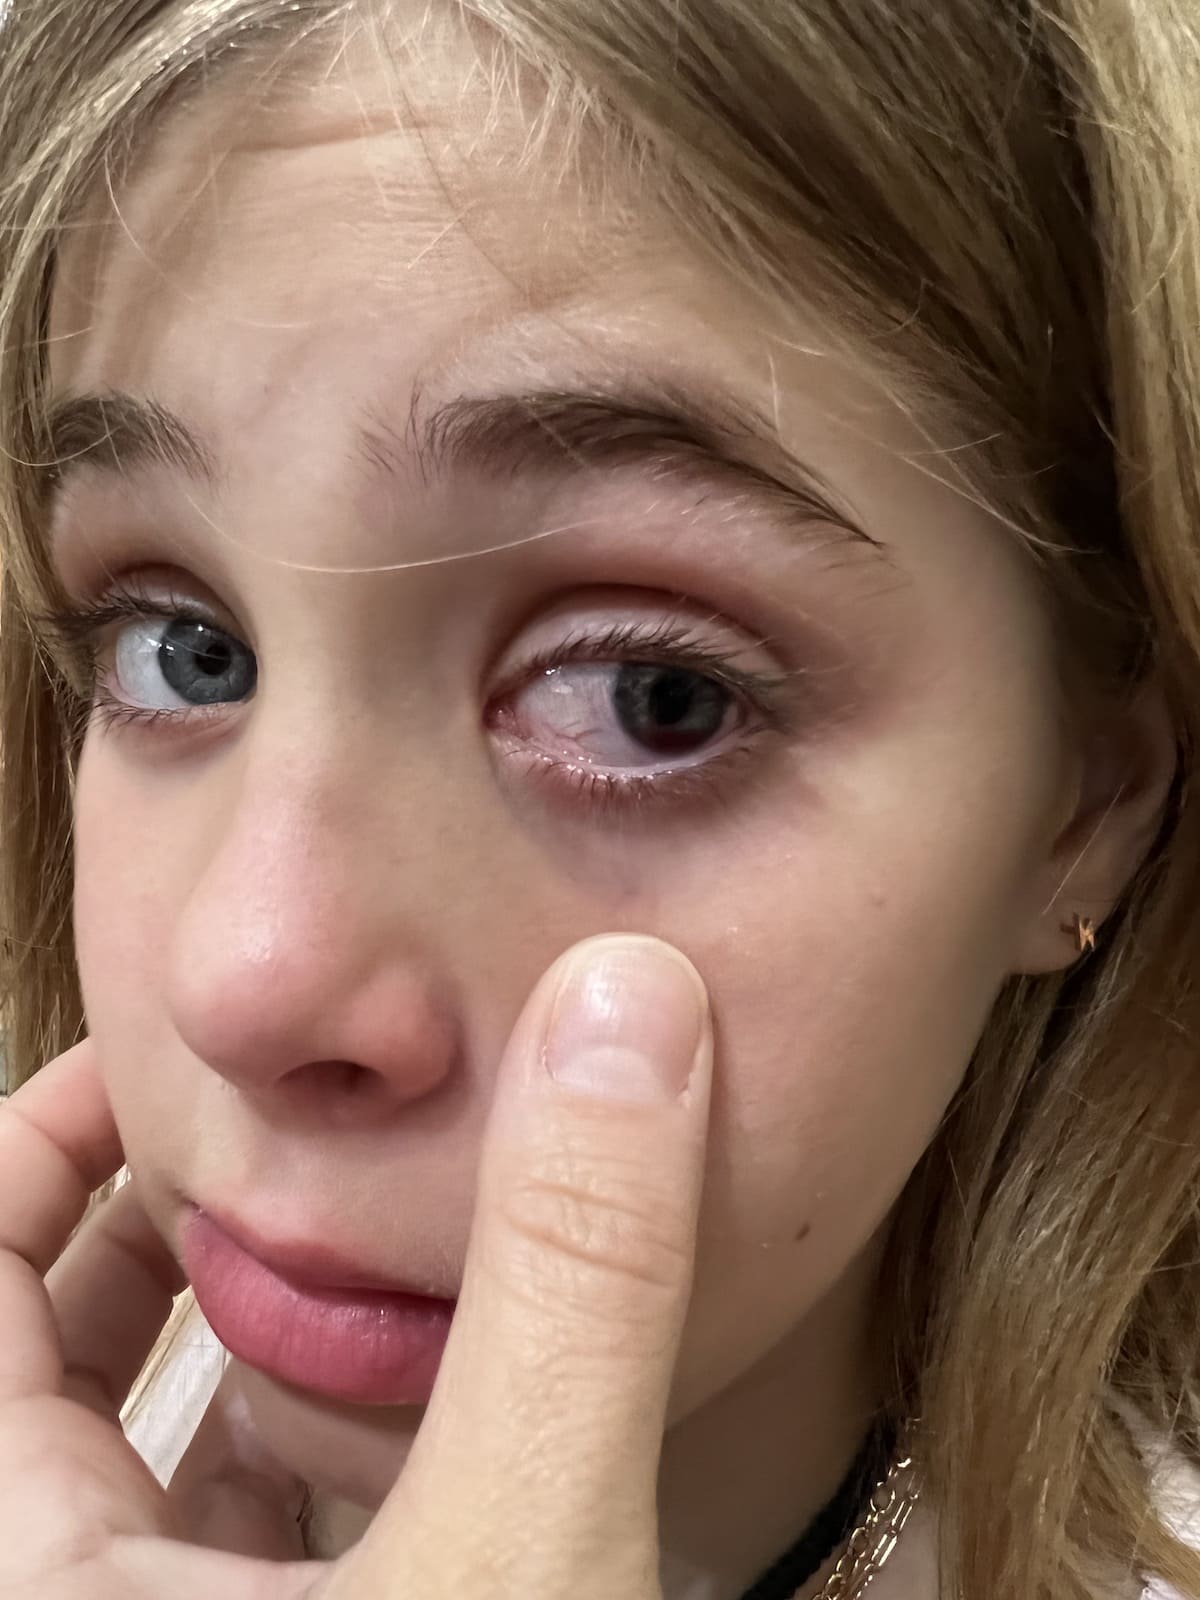 Nerf Gun Eye Injury: What To Do When Your Child Has Been Hit in the Eye with Nerf Dart Bullet